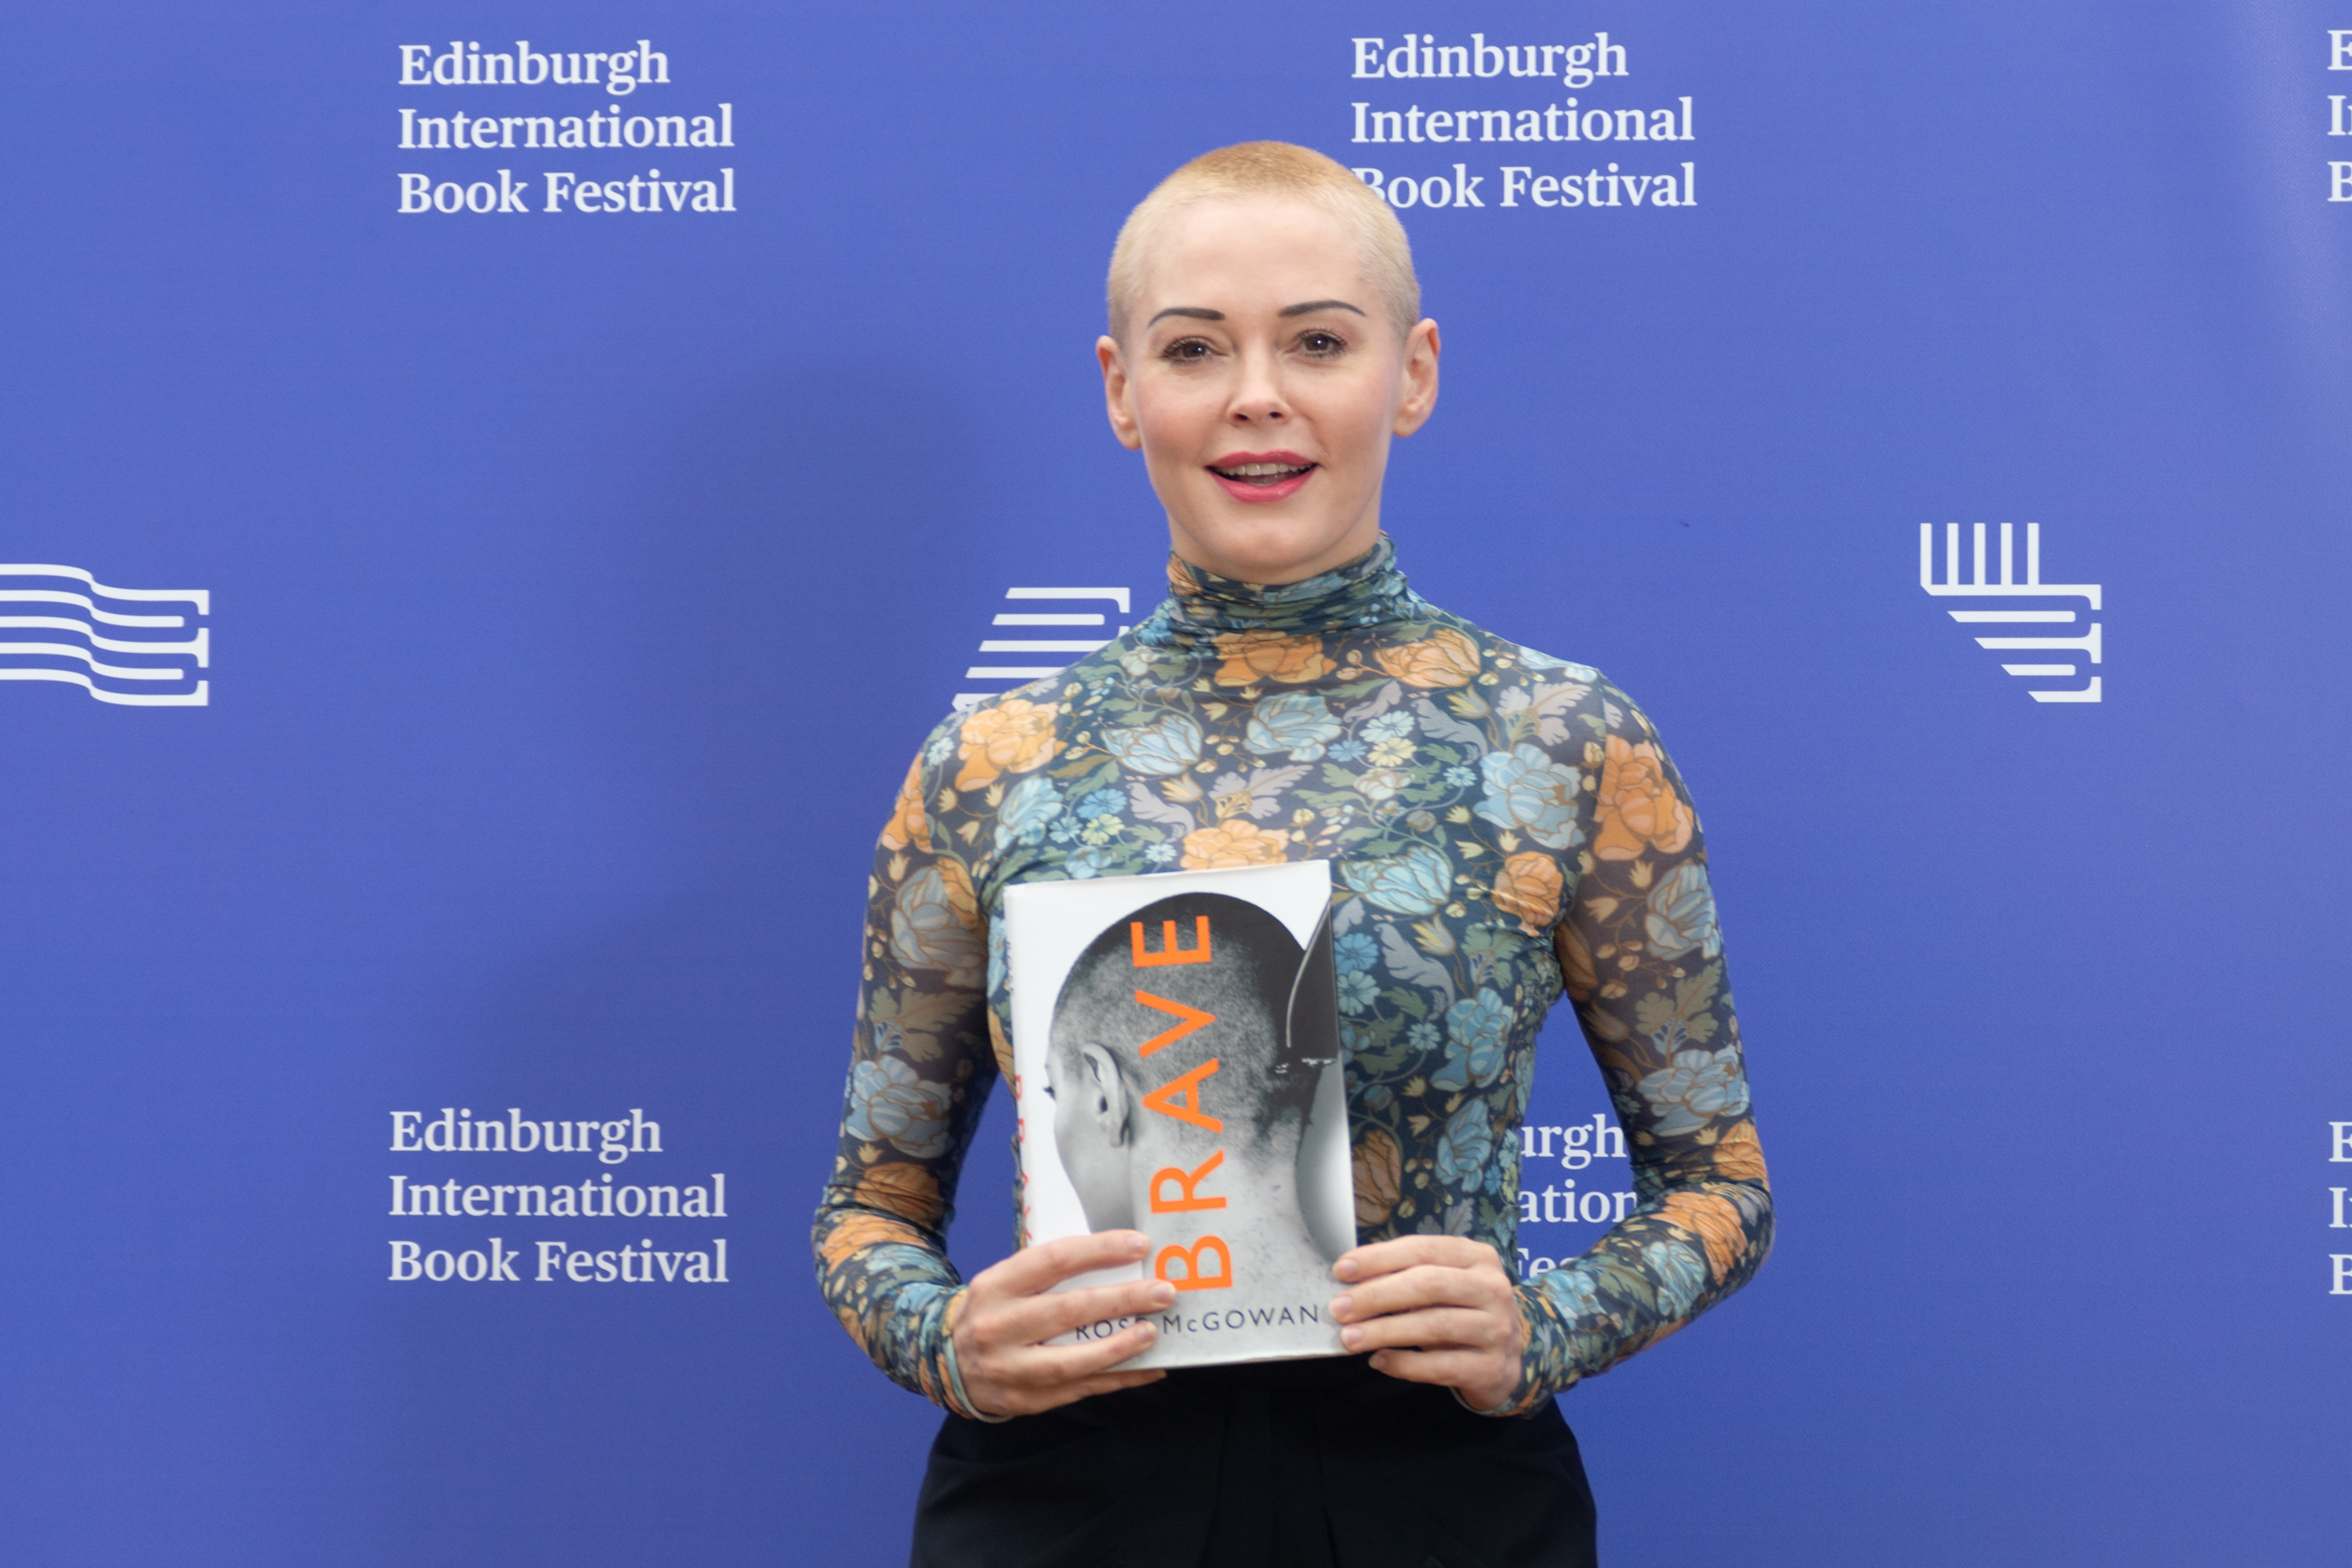 Rose McGowan attends a photocall during the annual Edinburgh International Book Festival in Edinburgh, Scotland, on August 13, 2018 . | Source: Getty Images